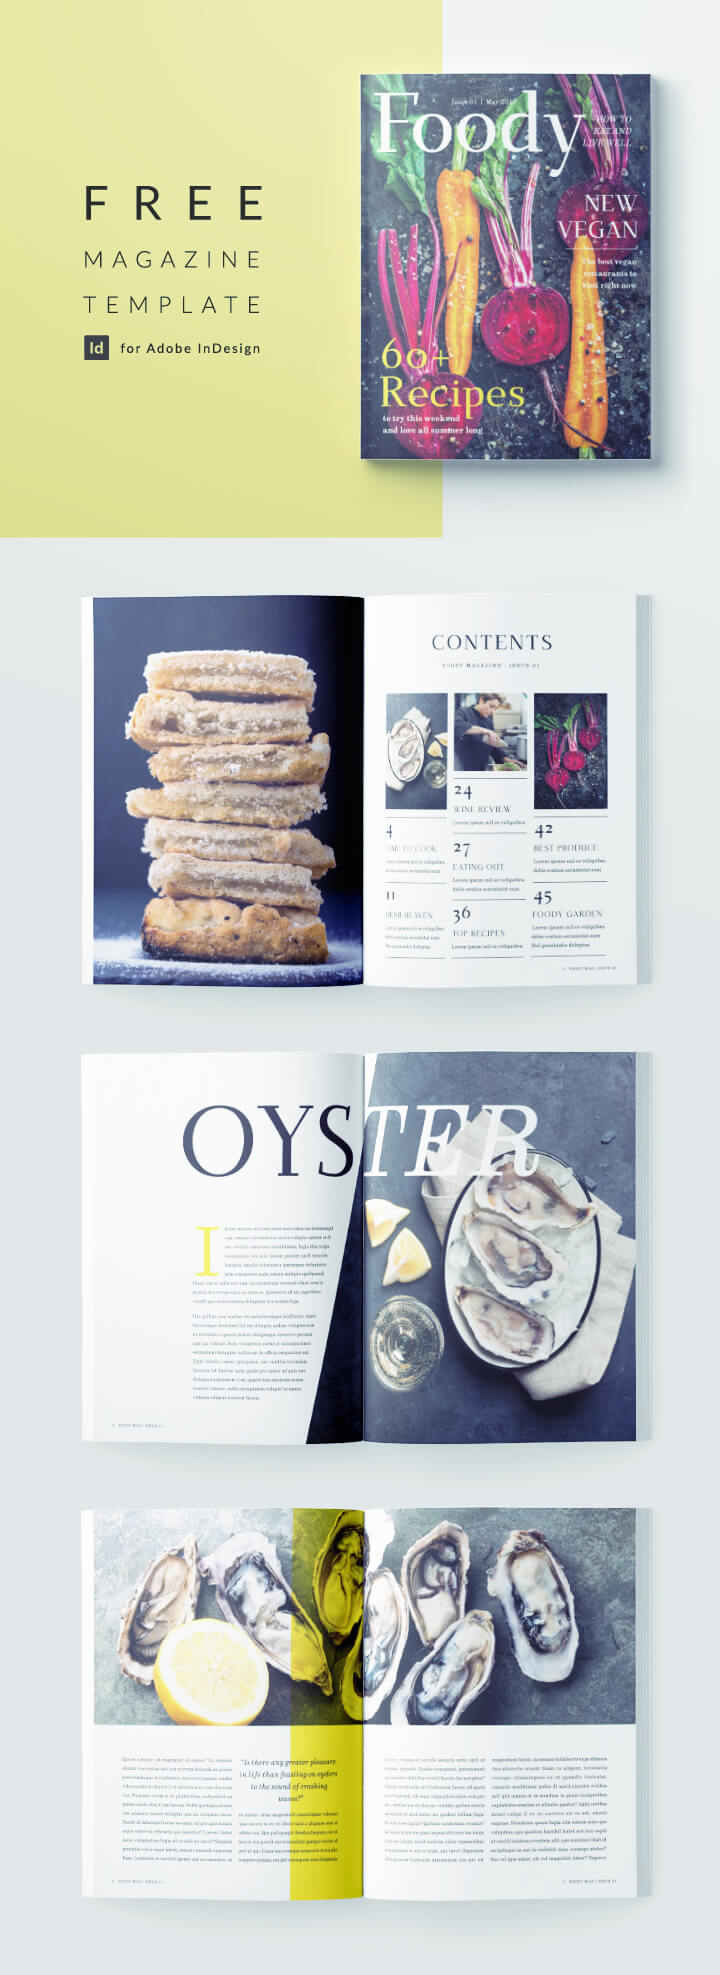 Free Magazine Template - Modern Food Magazine - 12 pages - Free Download for InDesign